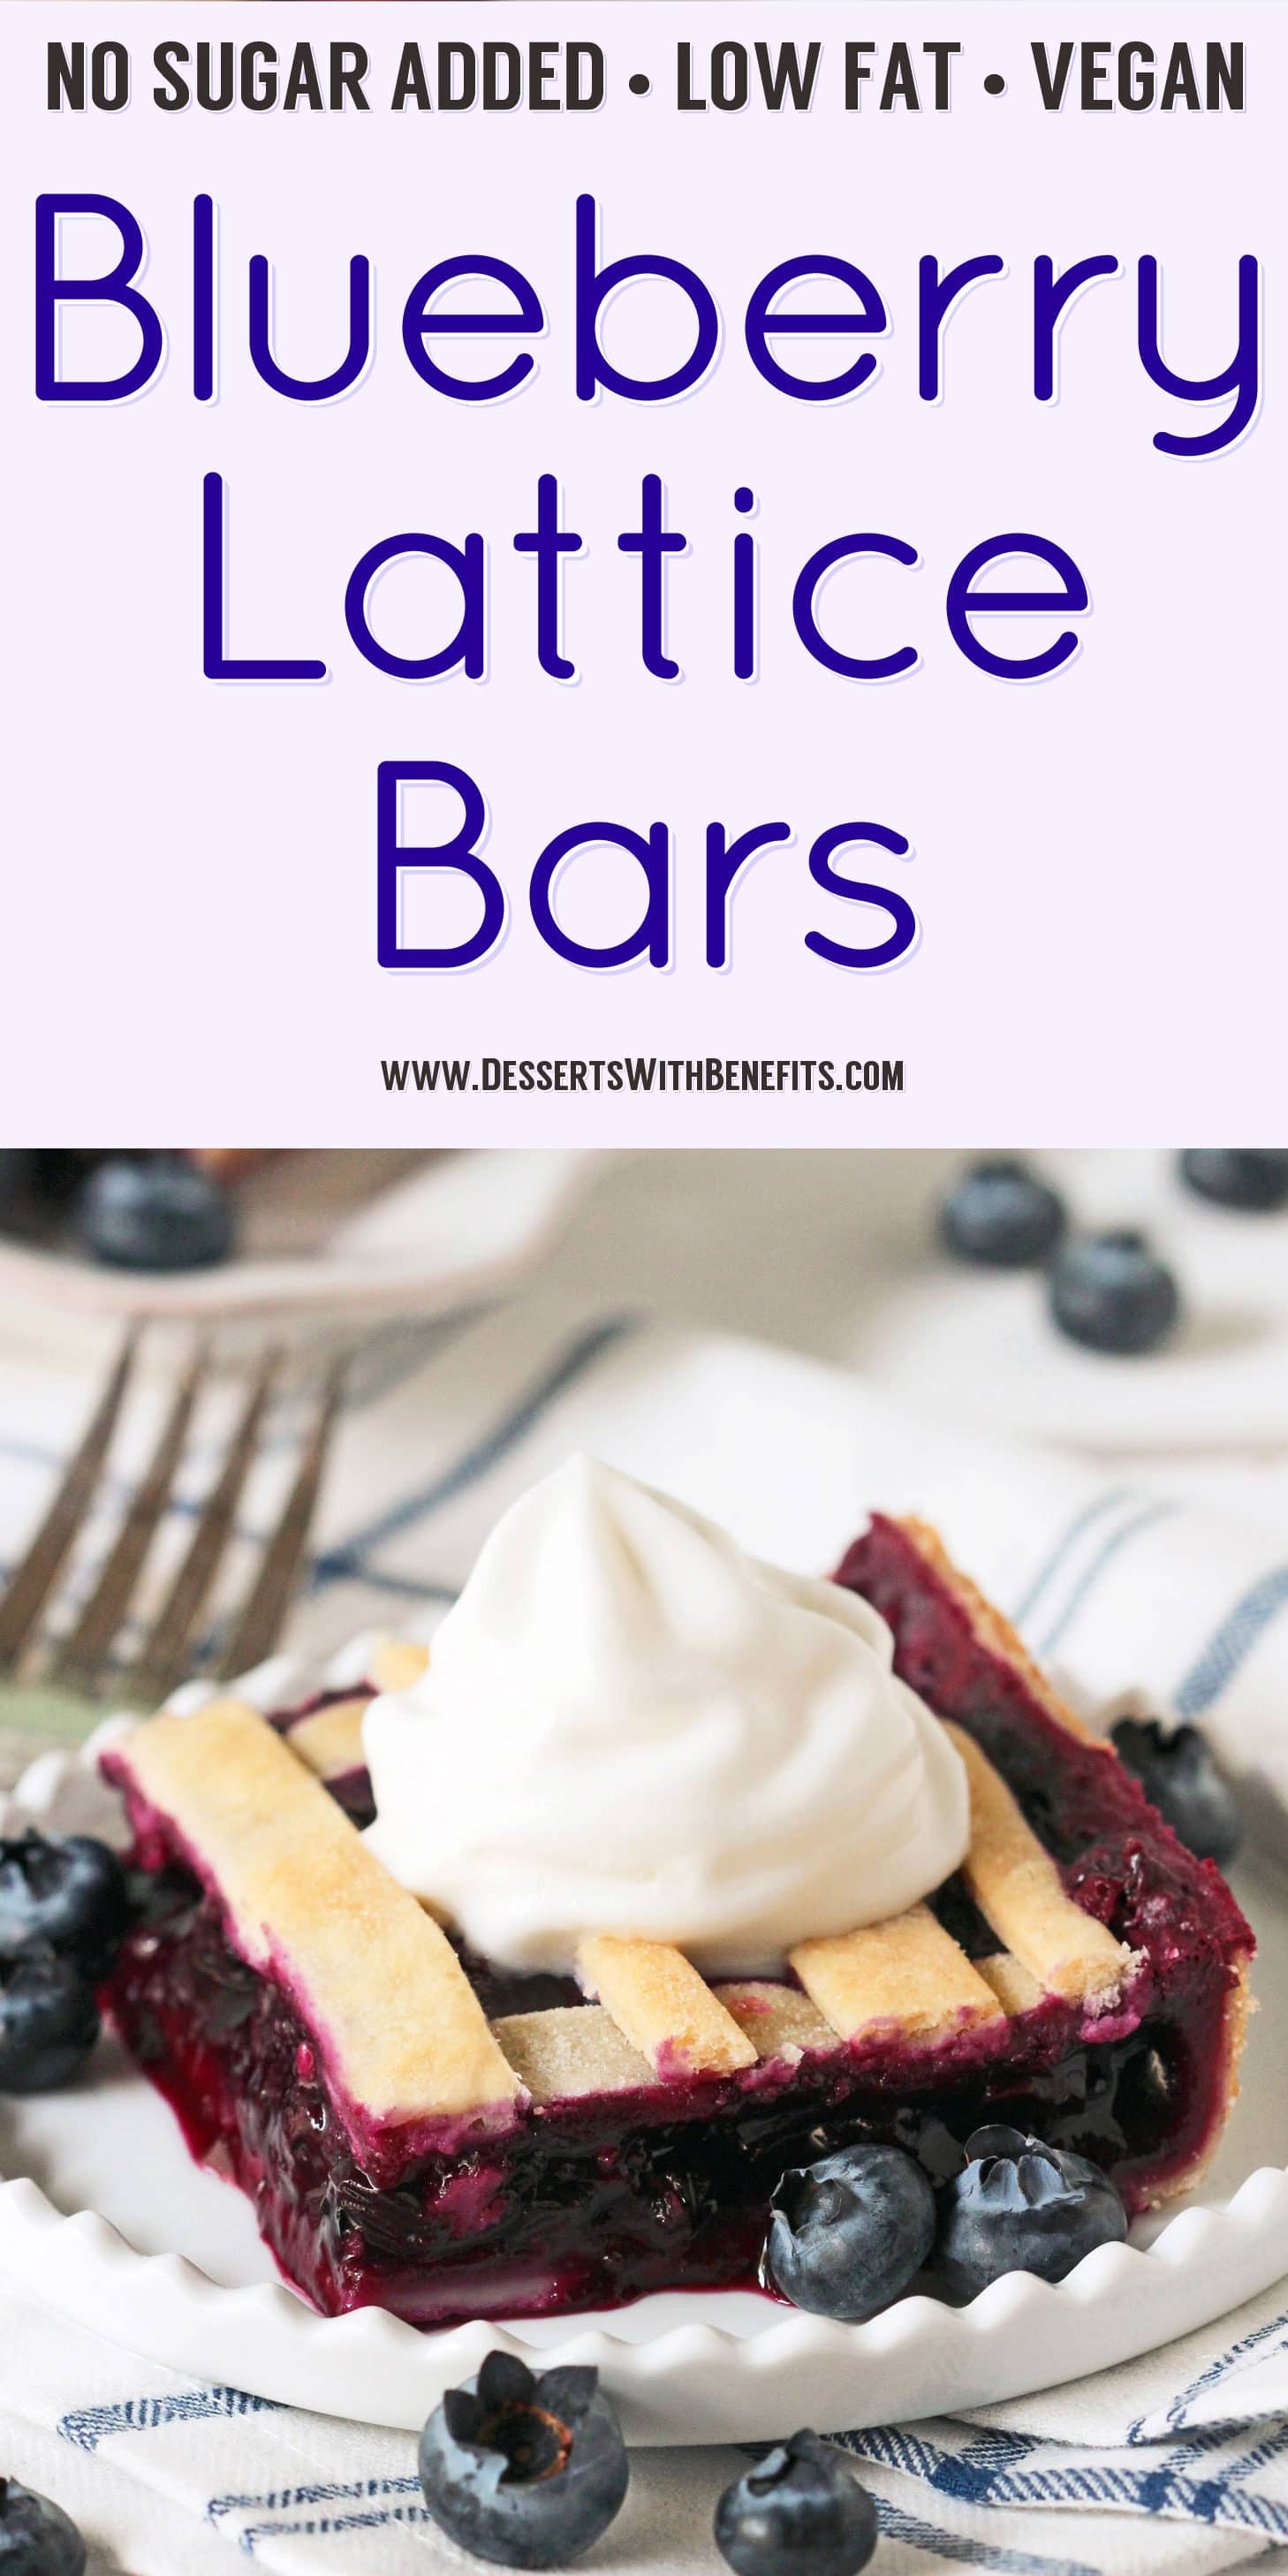 These 5-ingredient Blueberry Lattice Bars are a guaranteed crowdpleaser! Bursting with sweet, fresh blueberry flavor, plus a buttery pie crust, you'd never know they're vegan, low fat, contain no added sugar, and are totally guilt free! Healthy Dessert Recipes with sugar free, low calorie, low carb, high protein, and gluten free options at the Desserts With Benefits Blog (www.DessertsWithBenefits.com)